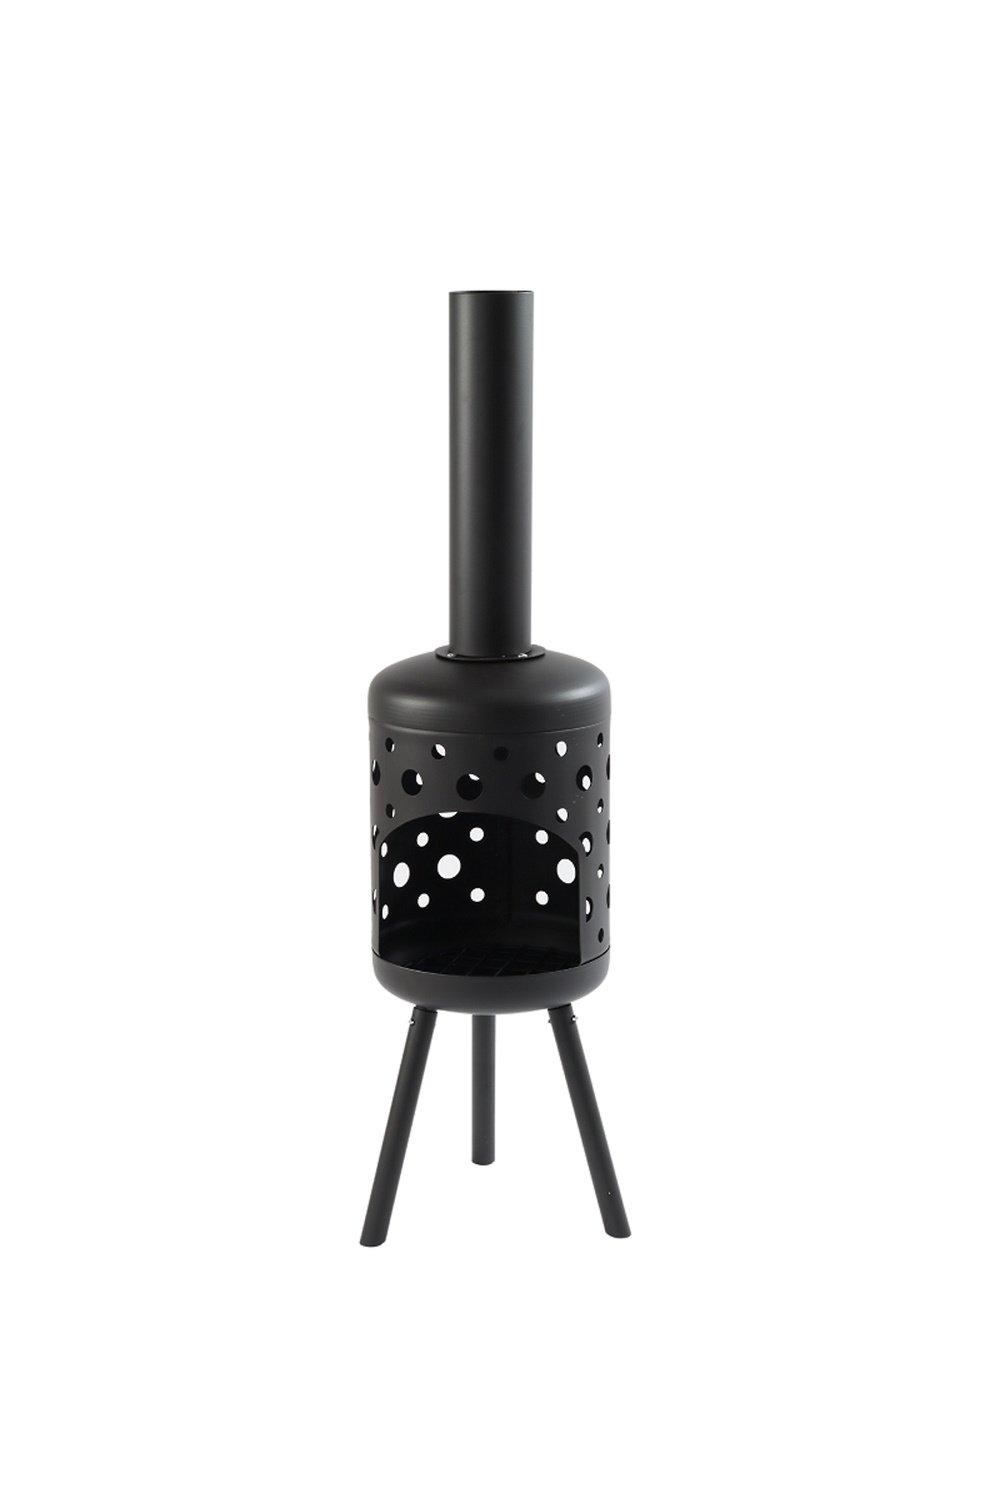 Gozo 115cm Tower Outdoor Fireplace